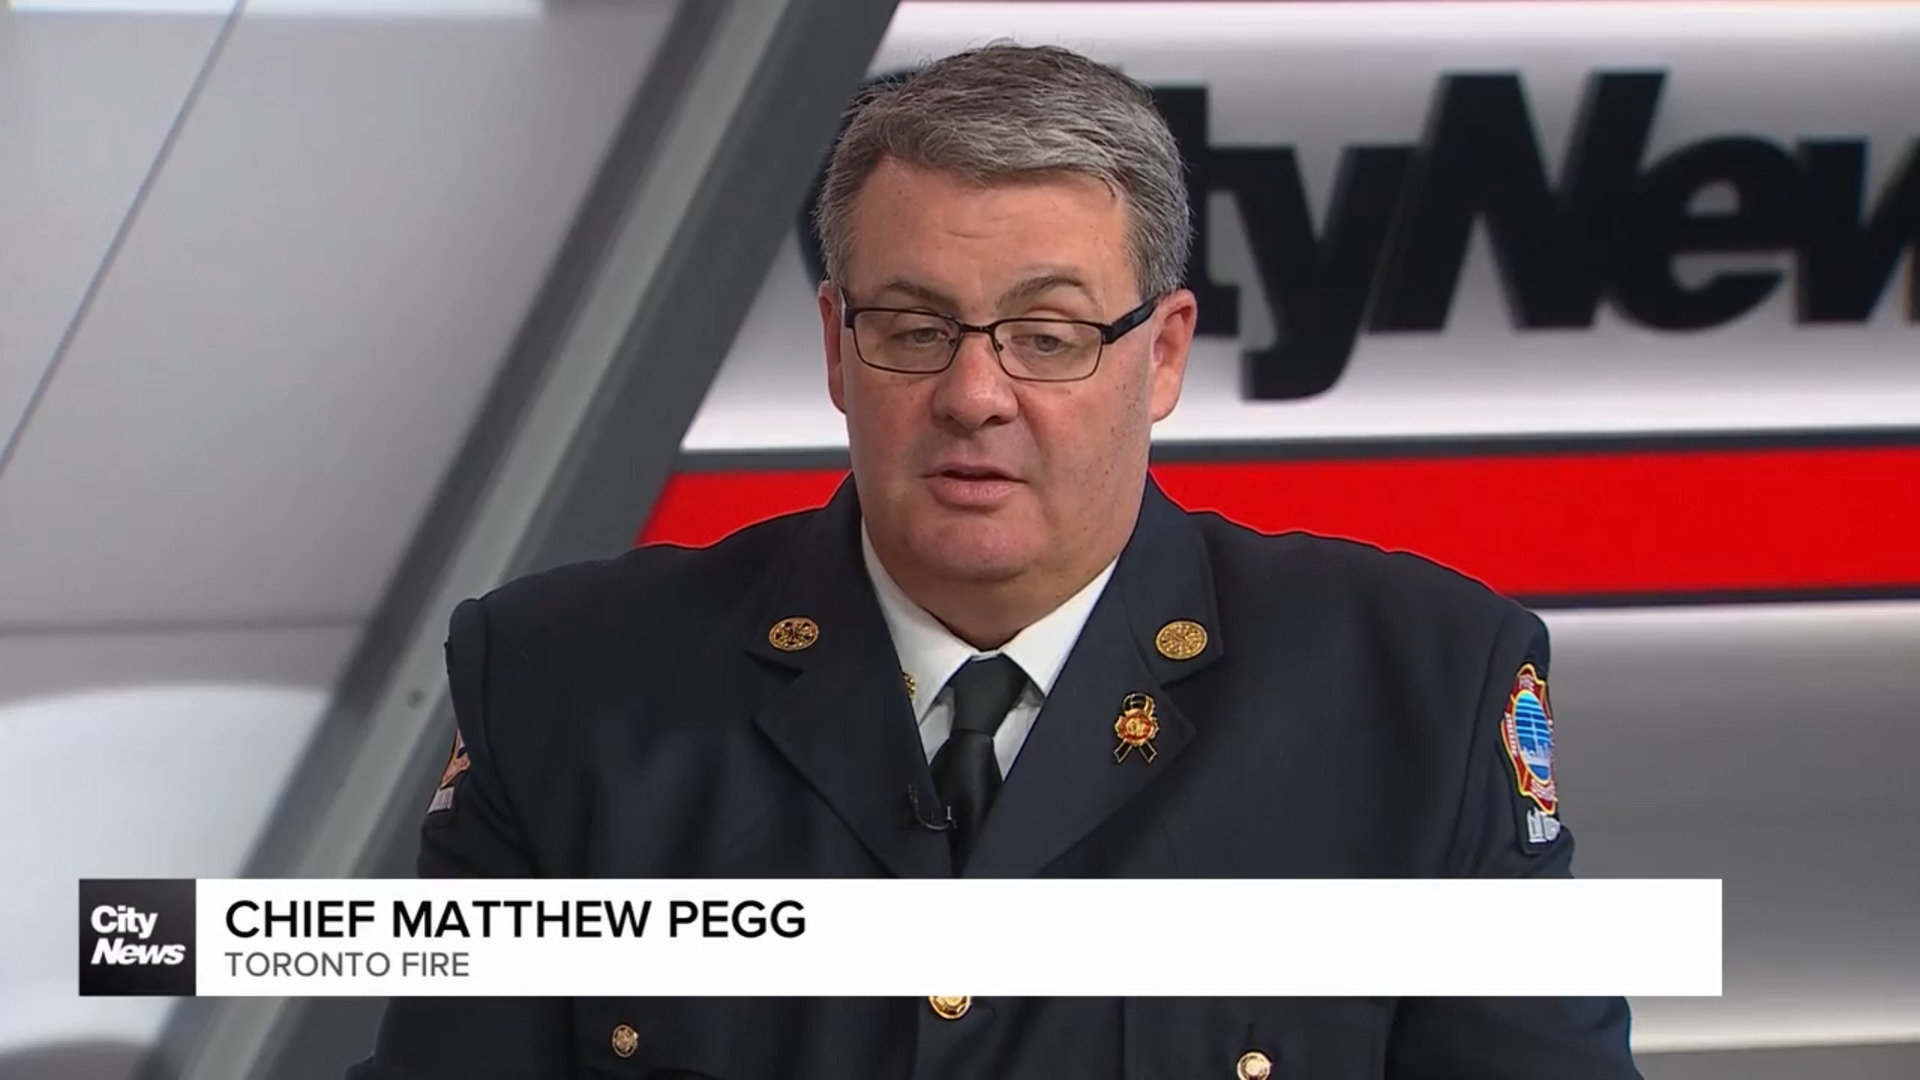 'It seems entirely surreal': Matthew Pegg looks back at his career as Toronto Fire Chief